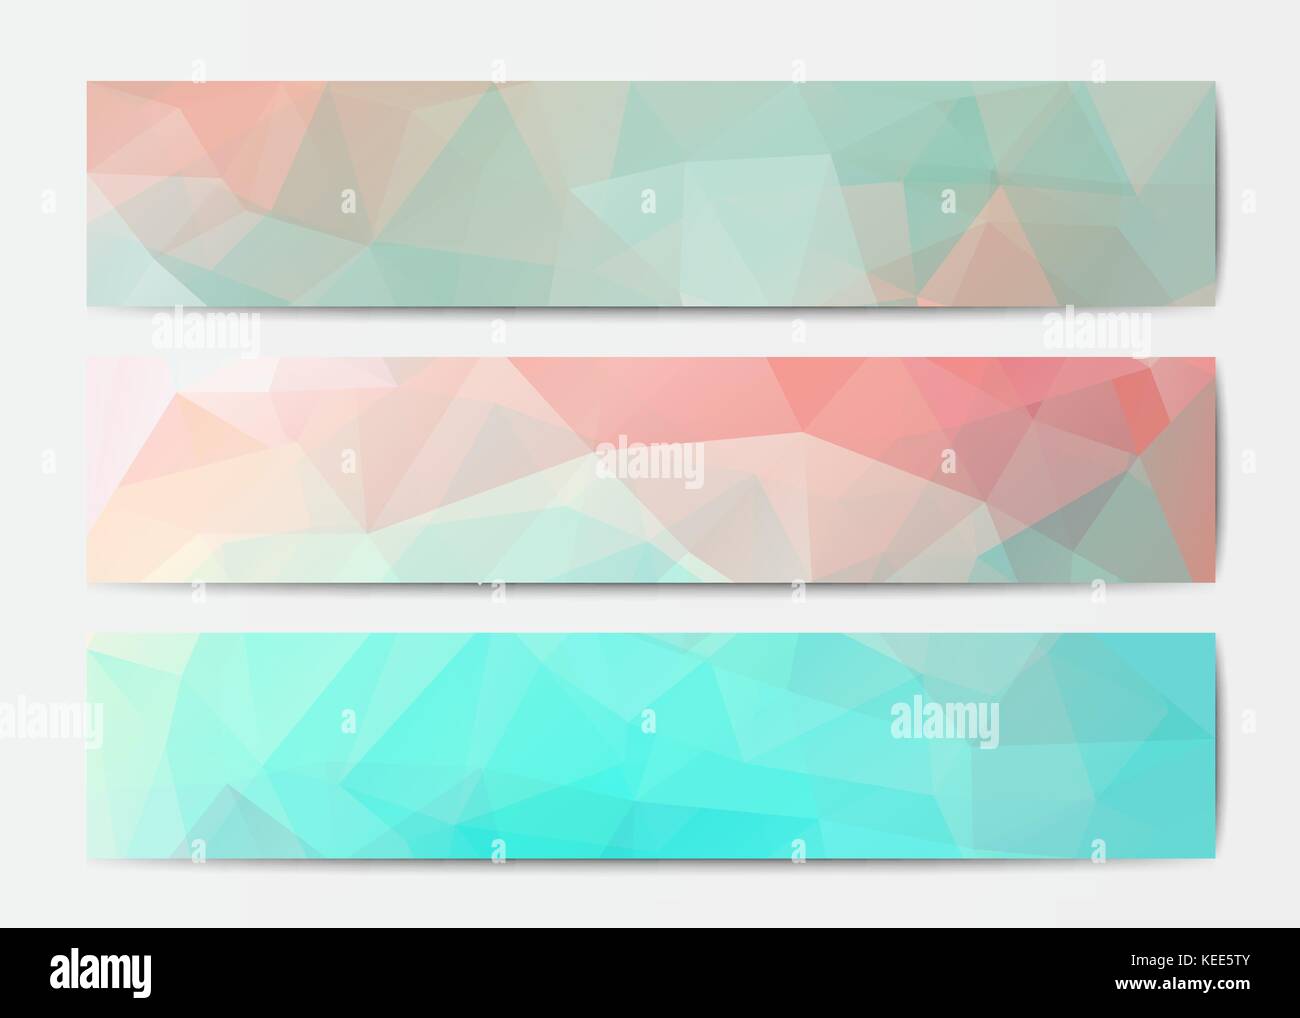 Abstract banner templates Stock Vector